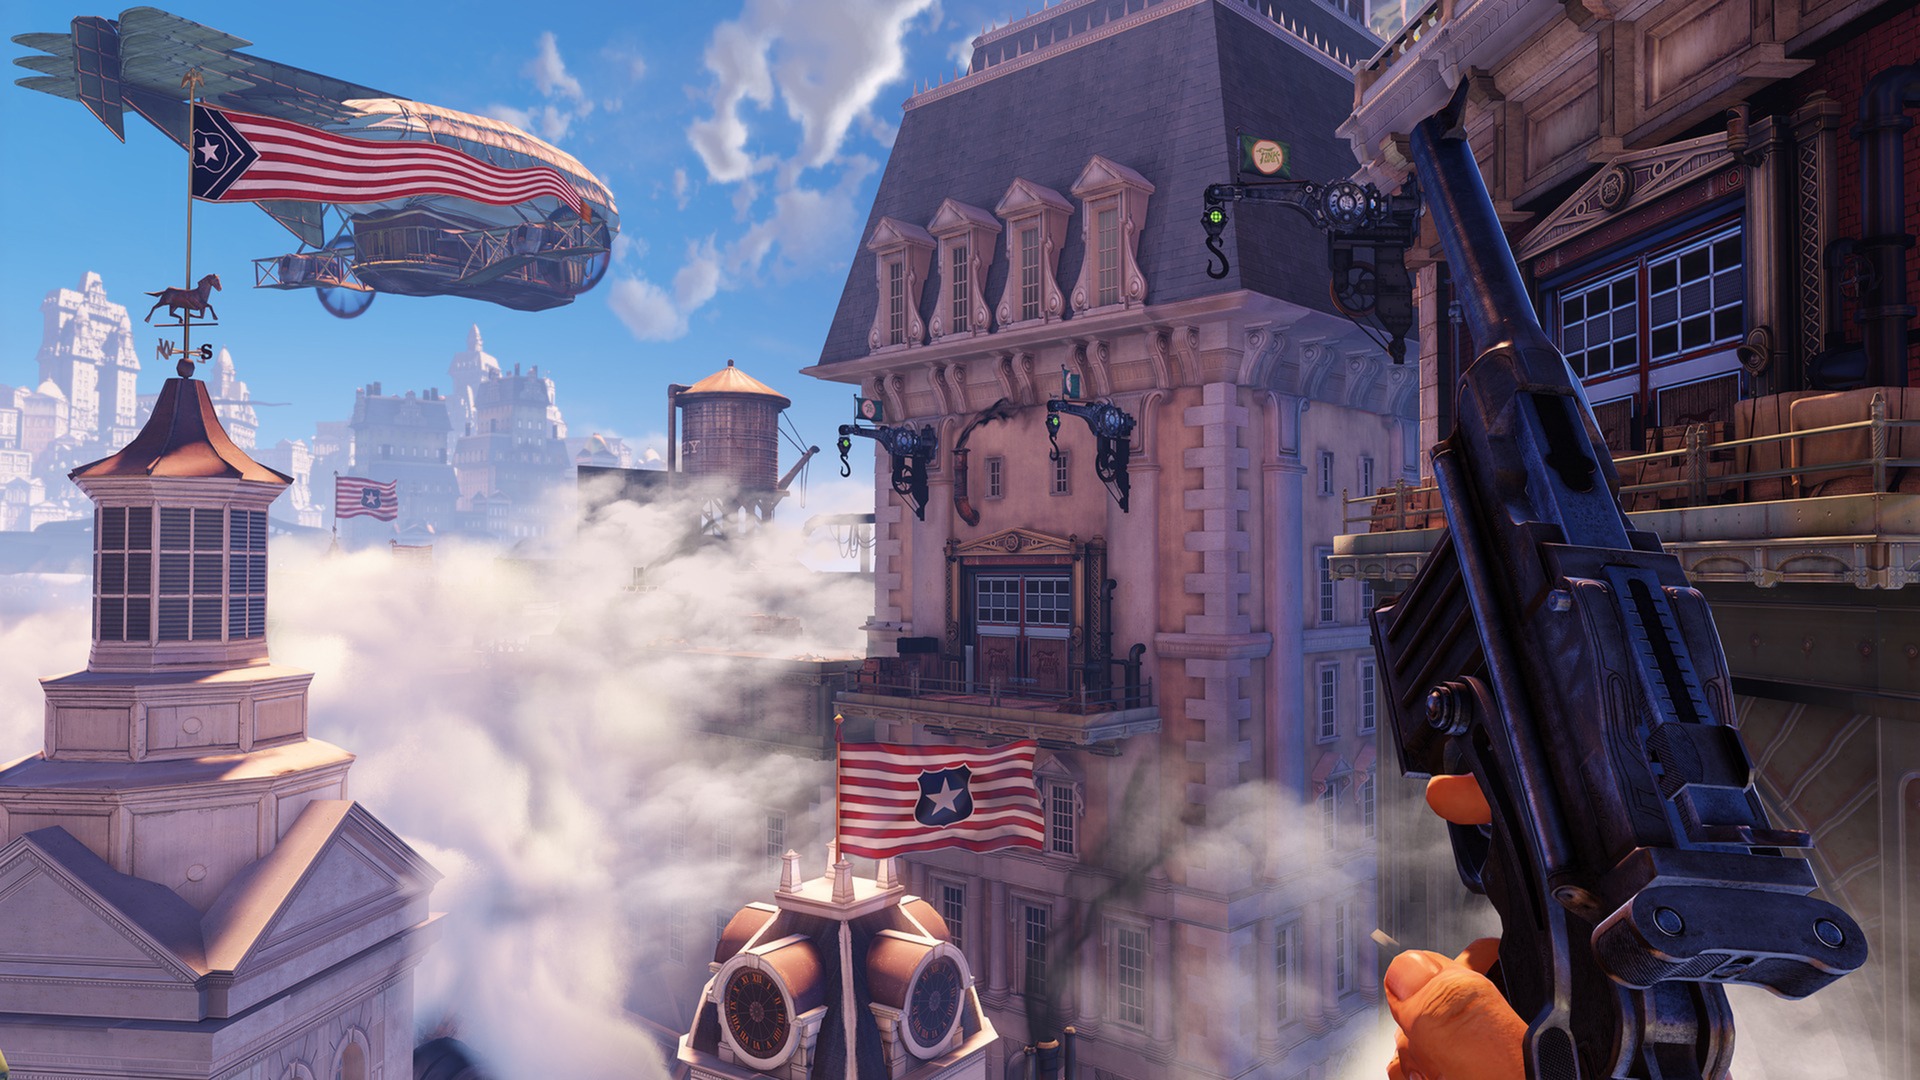 BioShock Infinite city of Columbia rooftop view in first-person